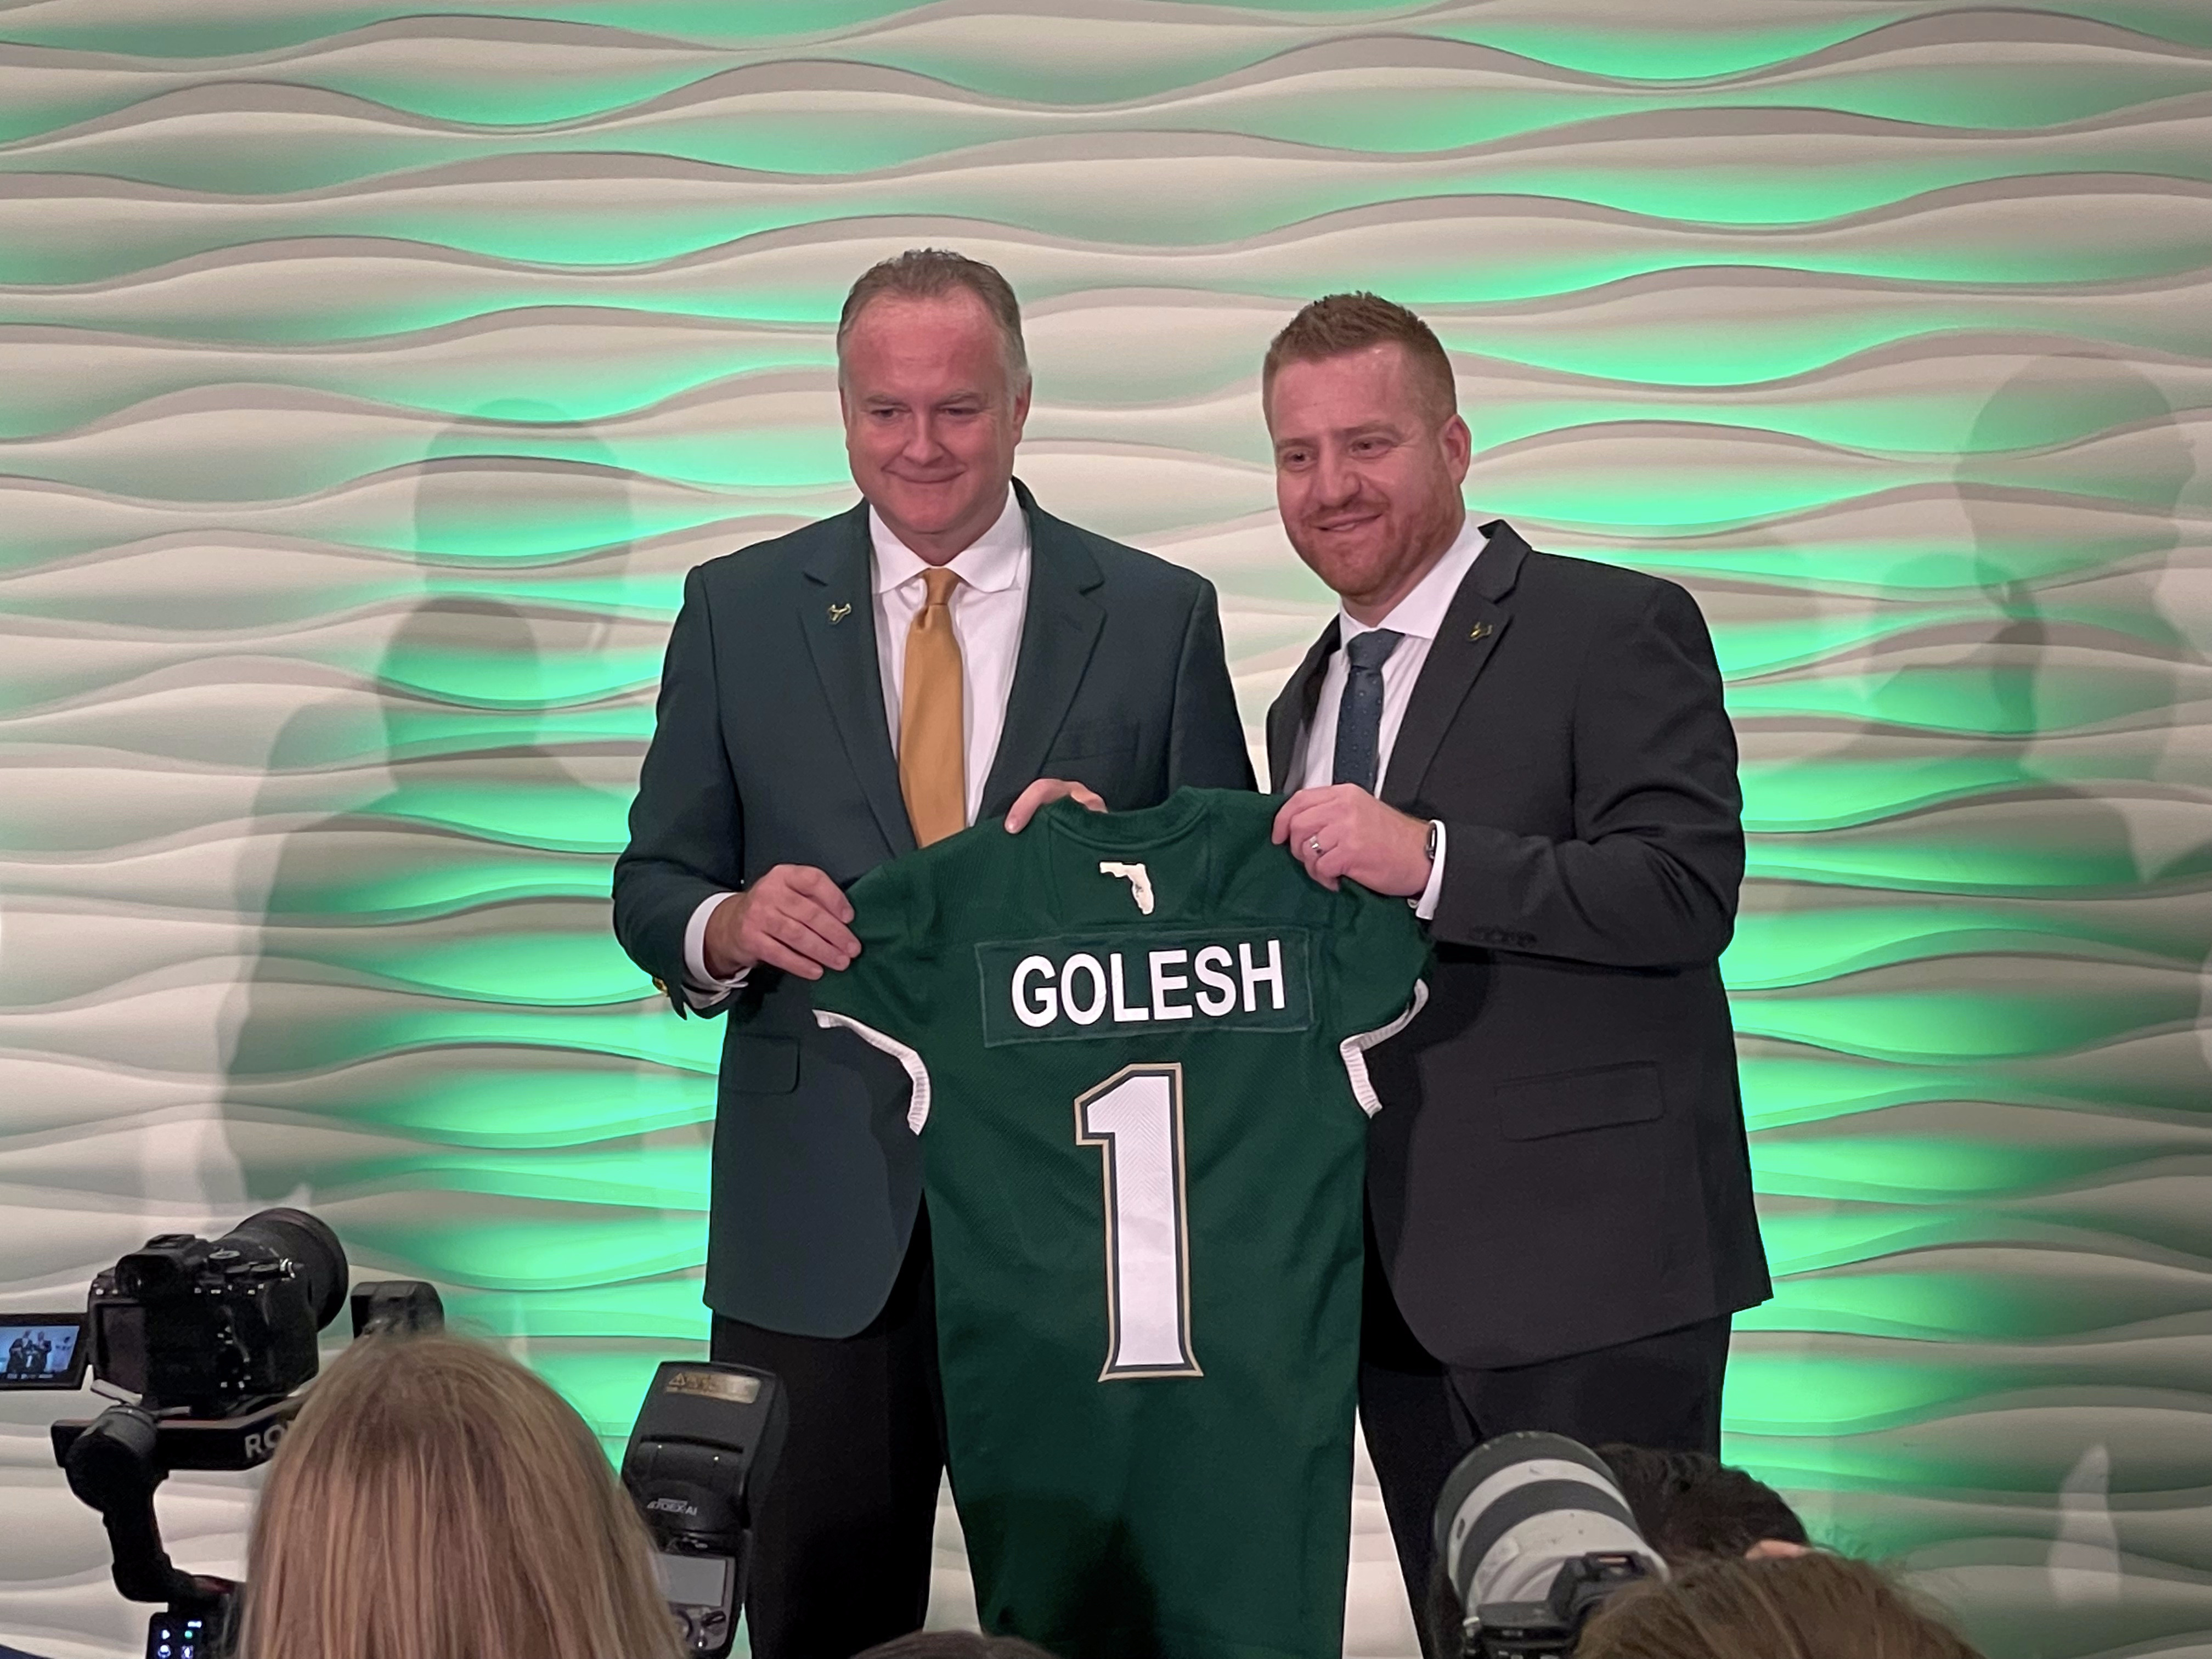 Michael Kelly and Alex Golesh hold up a Golesh USF Football jersey during his introductory press conference. 